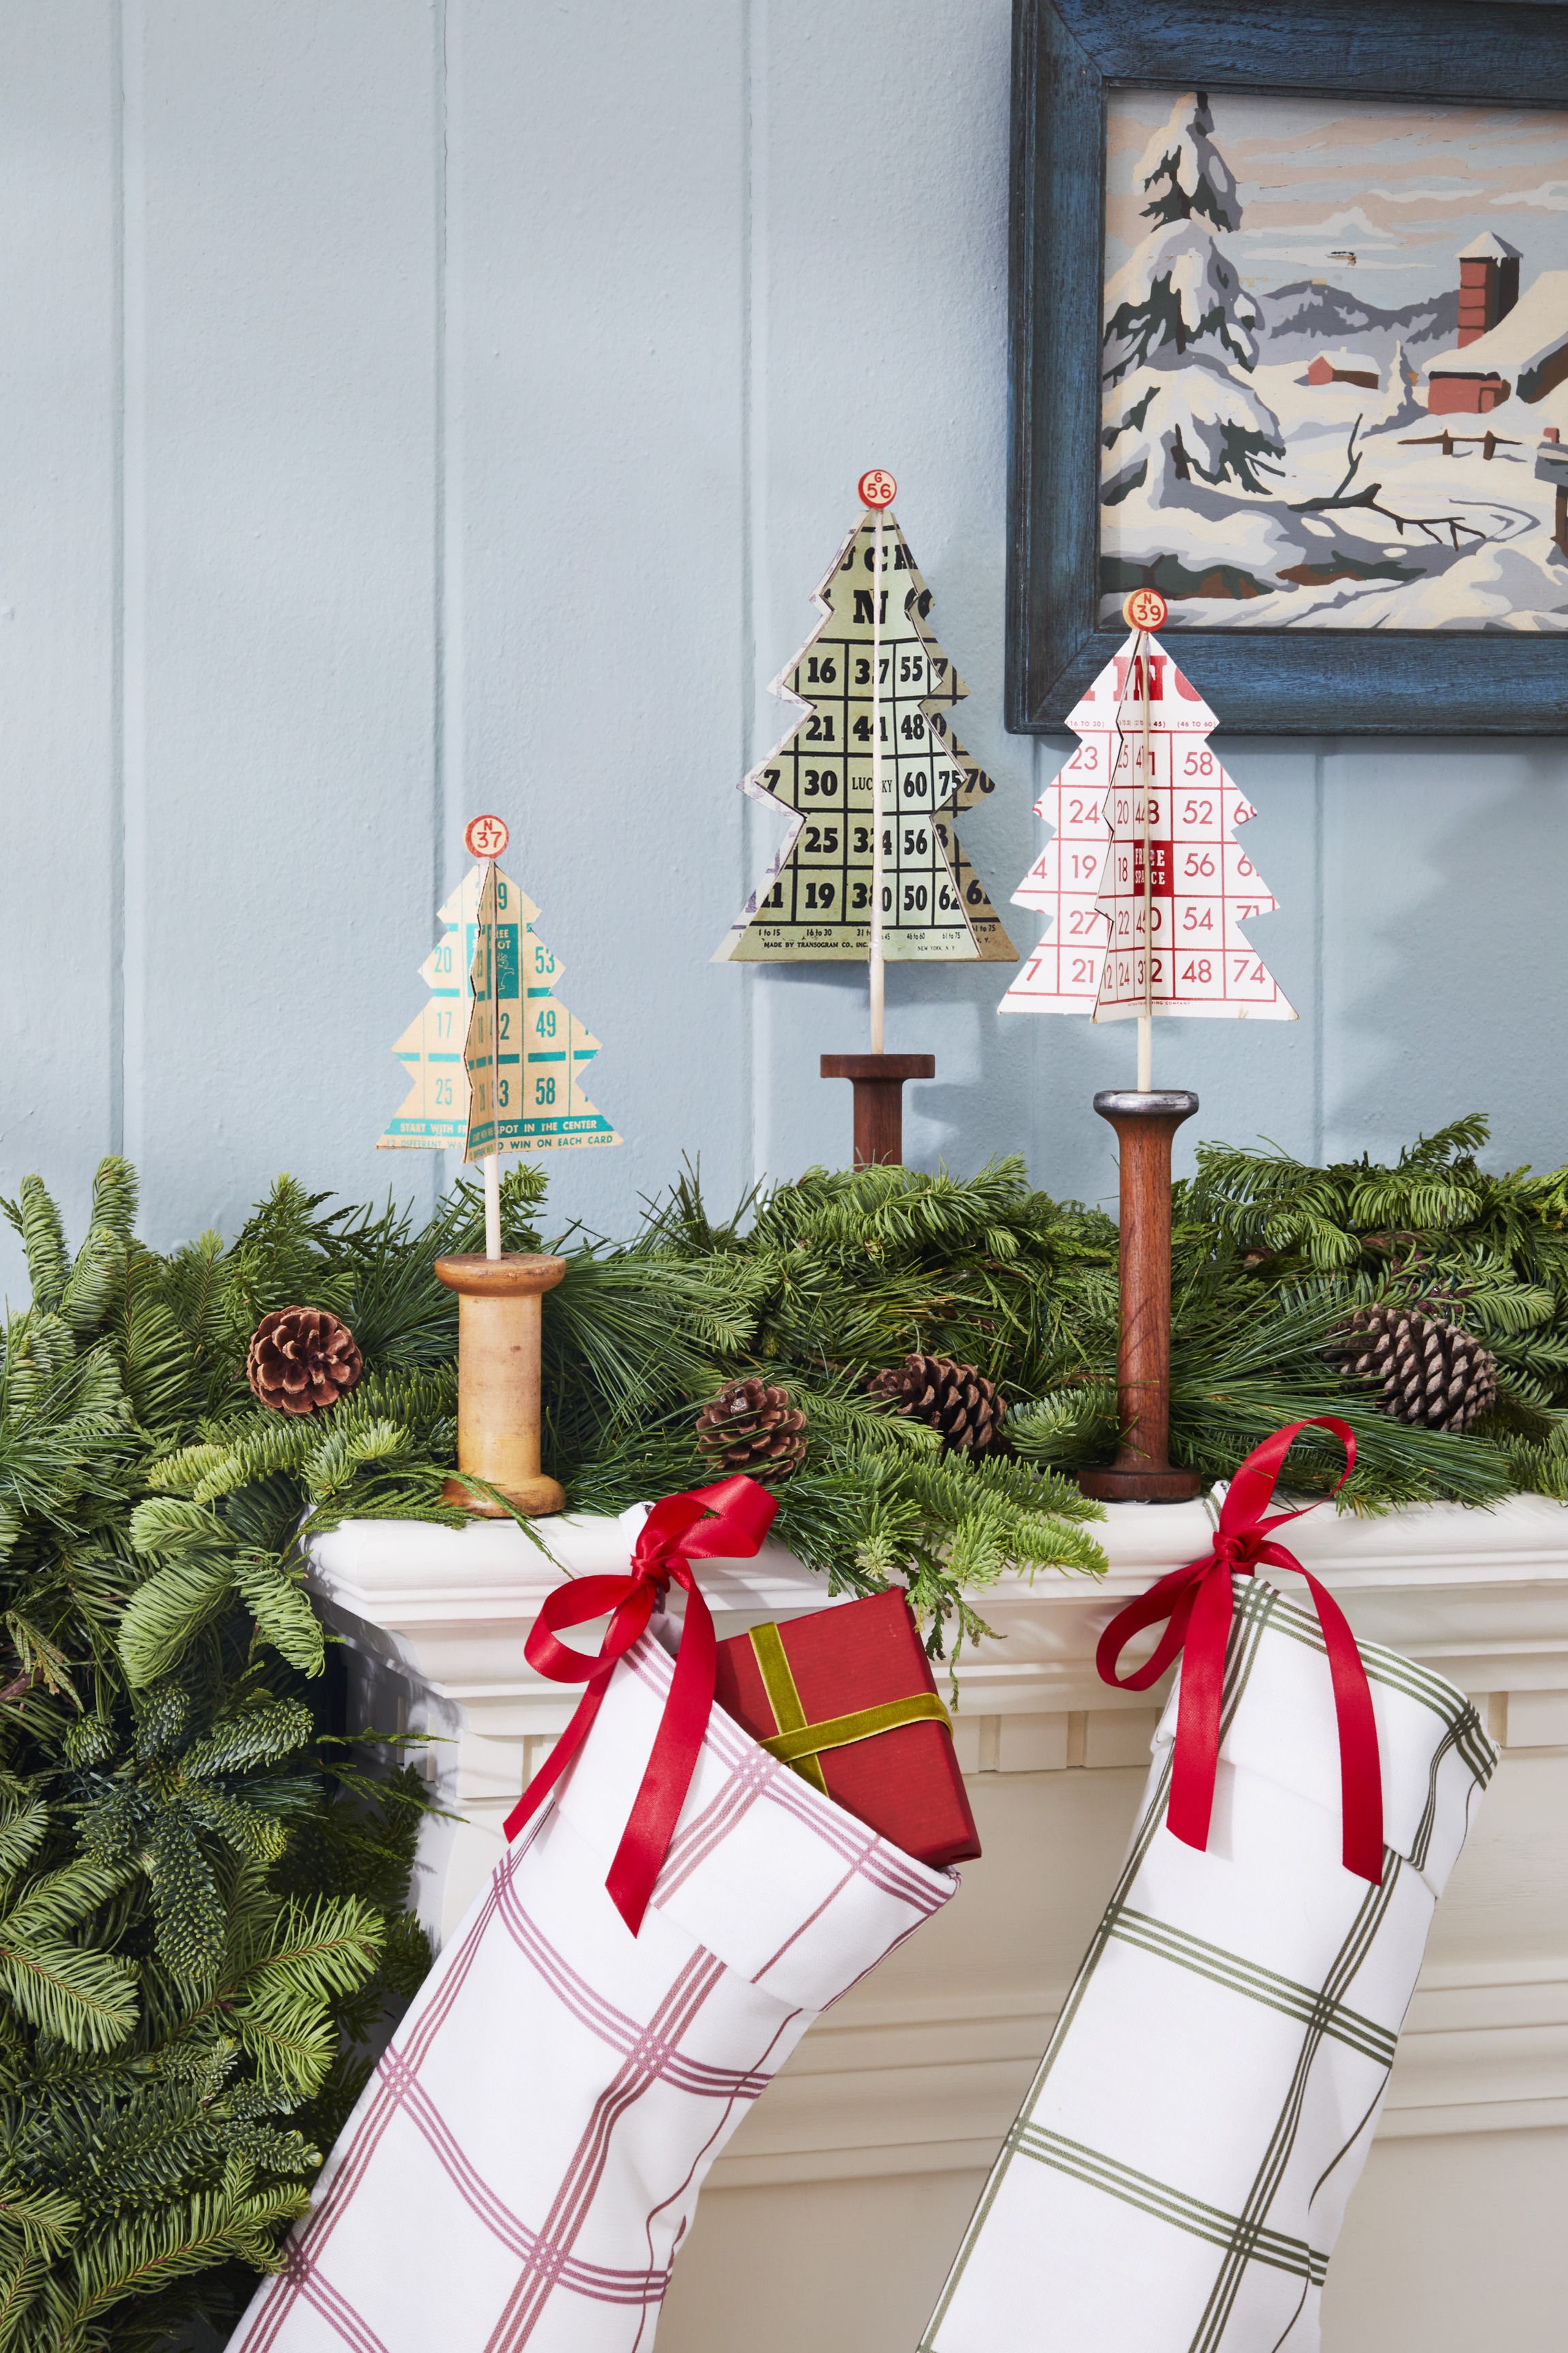 40 Best Small Christmas Tree Decorations - Ideas for Mini